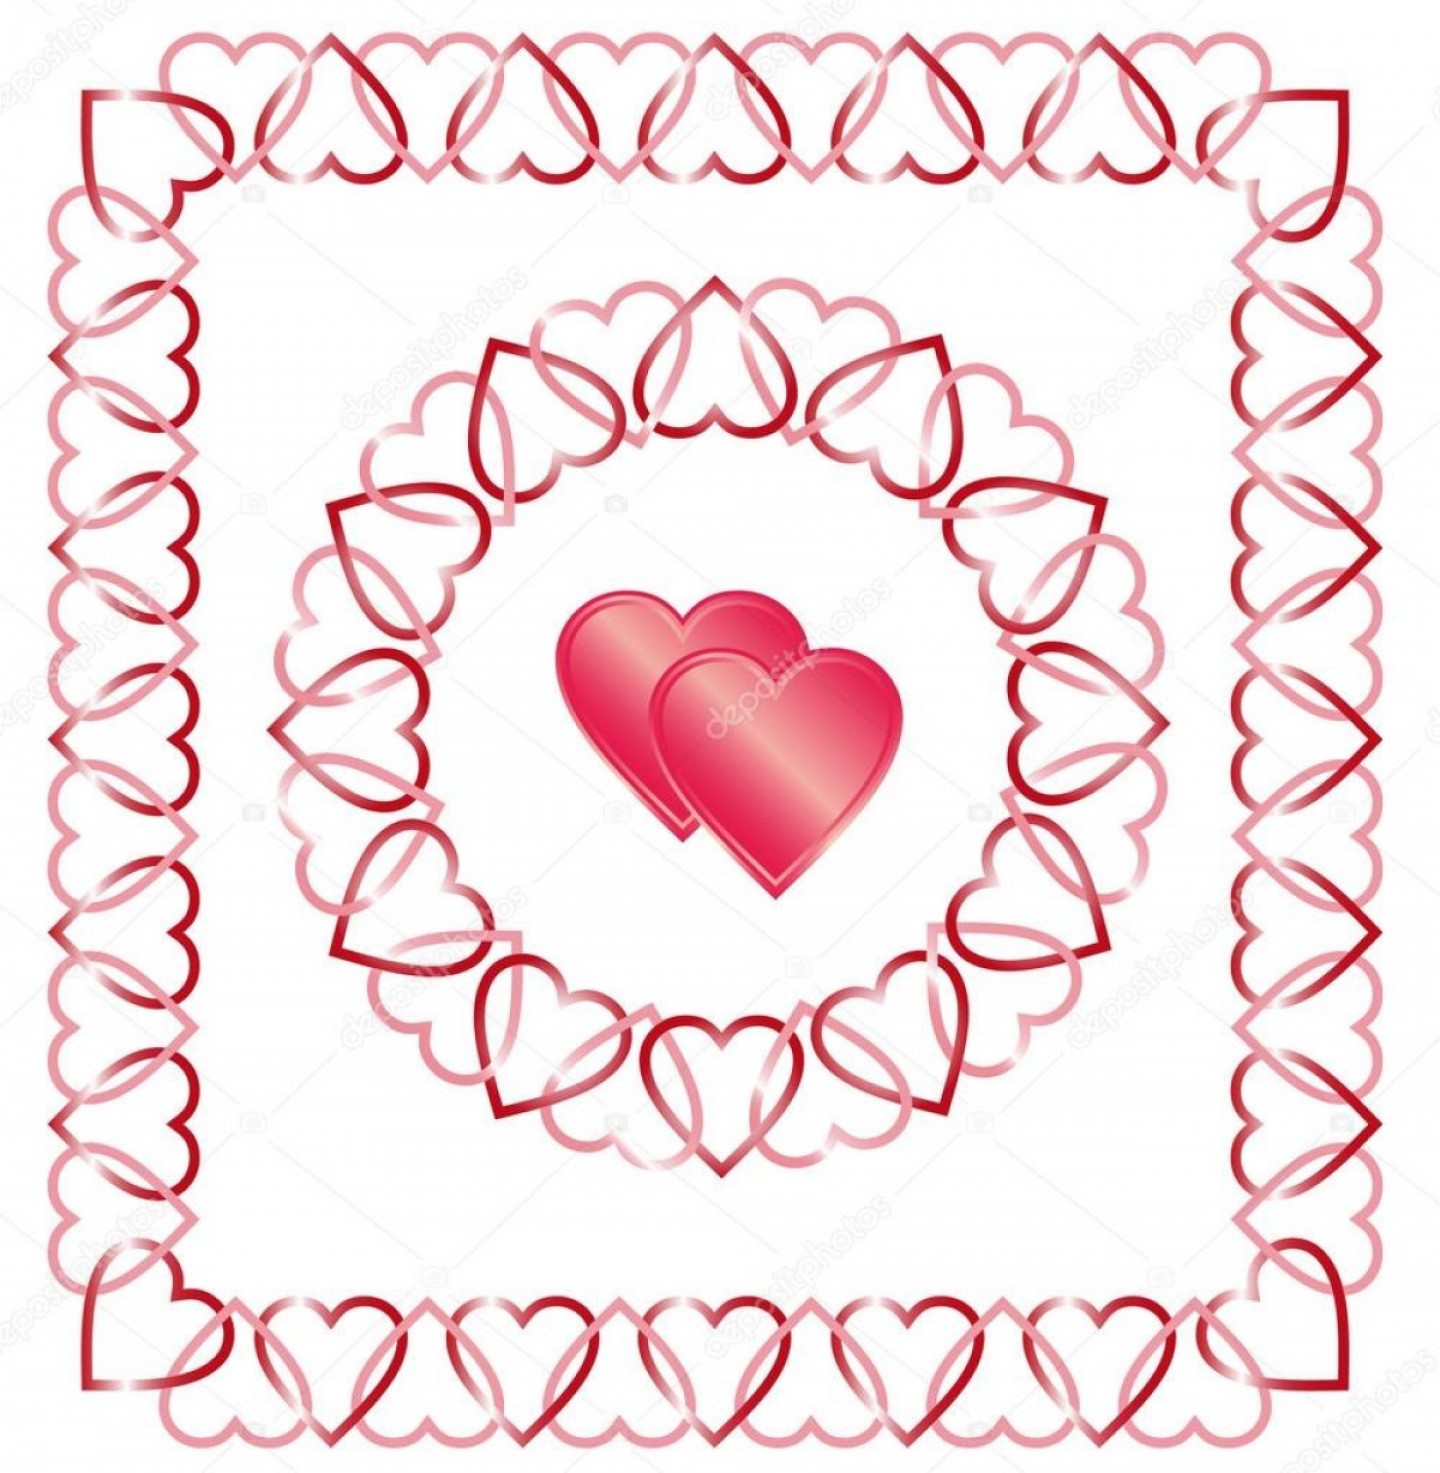 Download Love Border Vector at Vectorified.com | Collection of Love ...